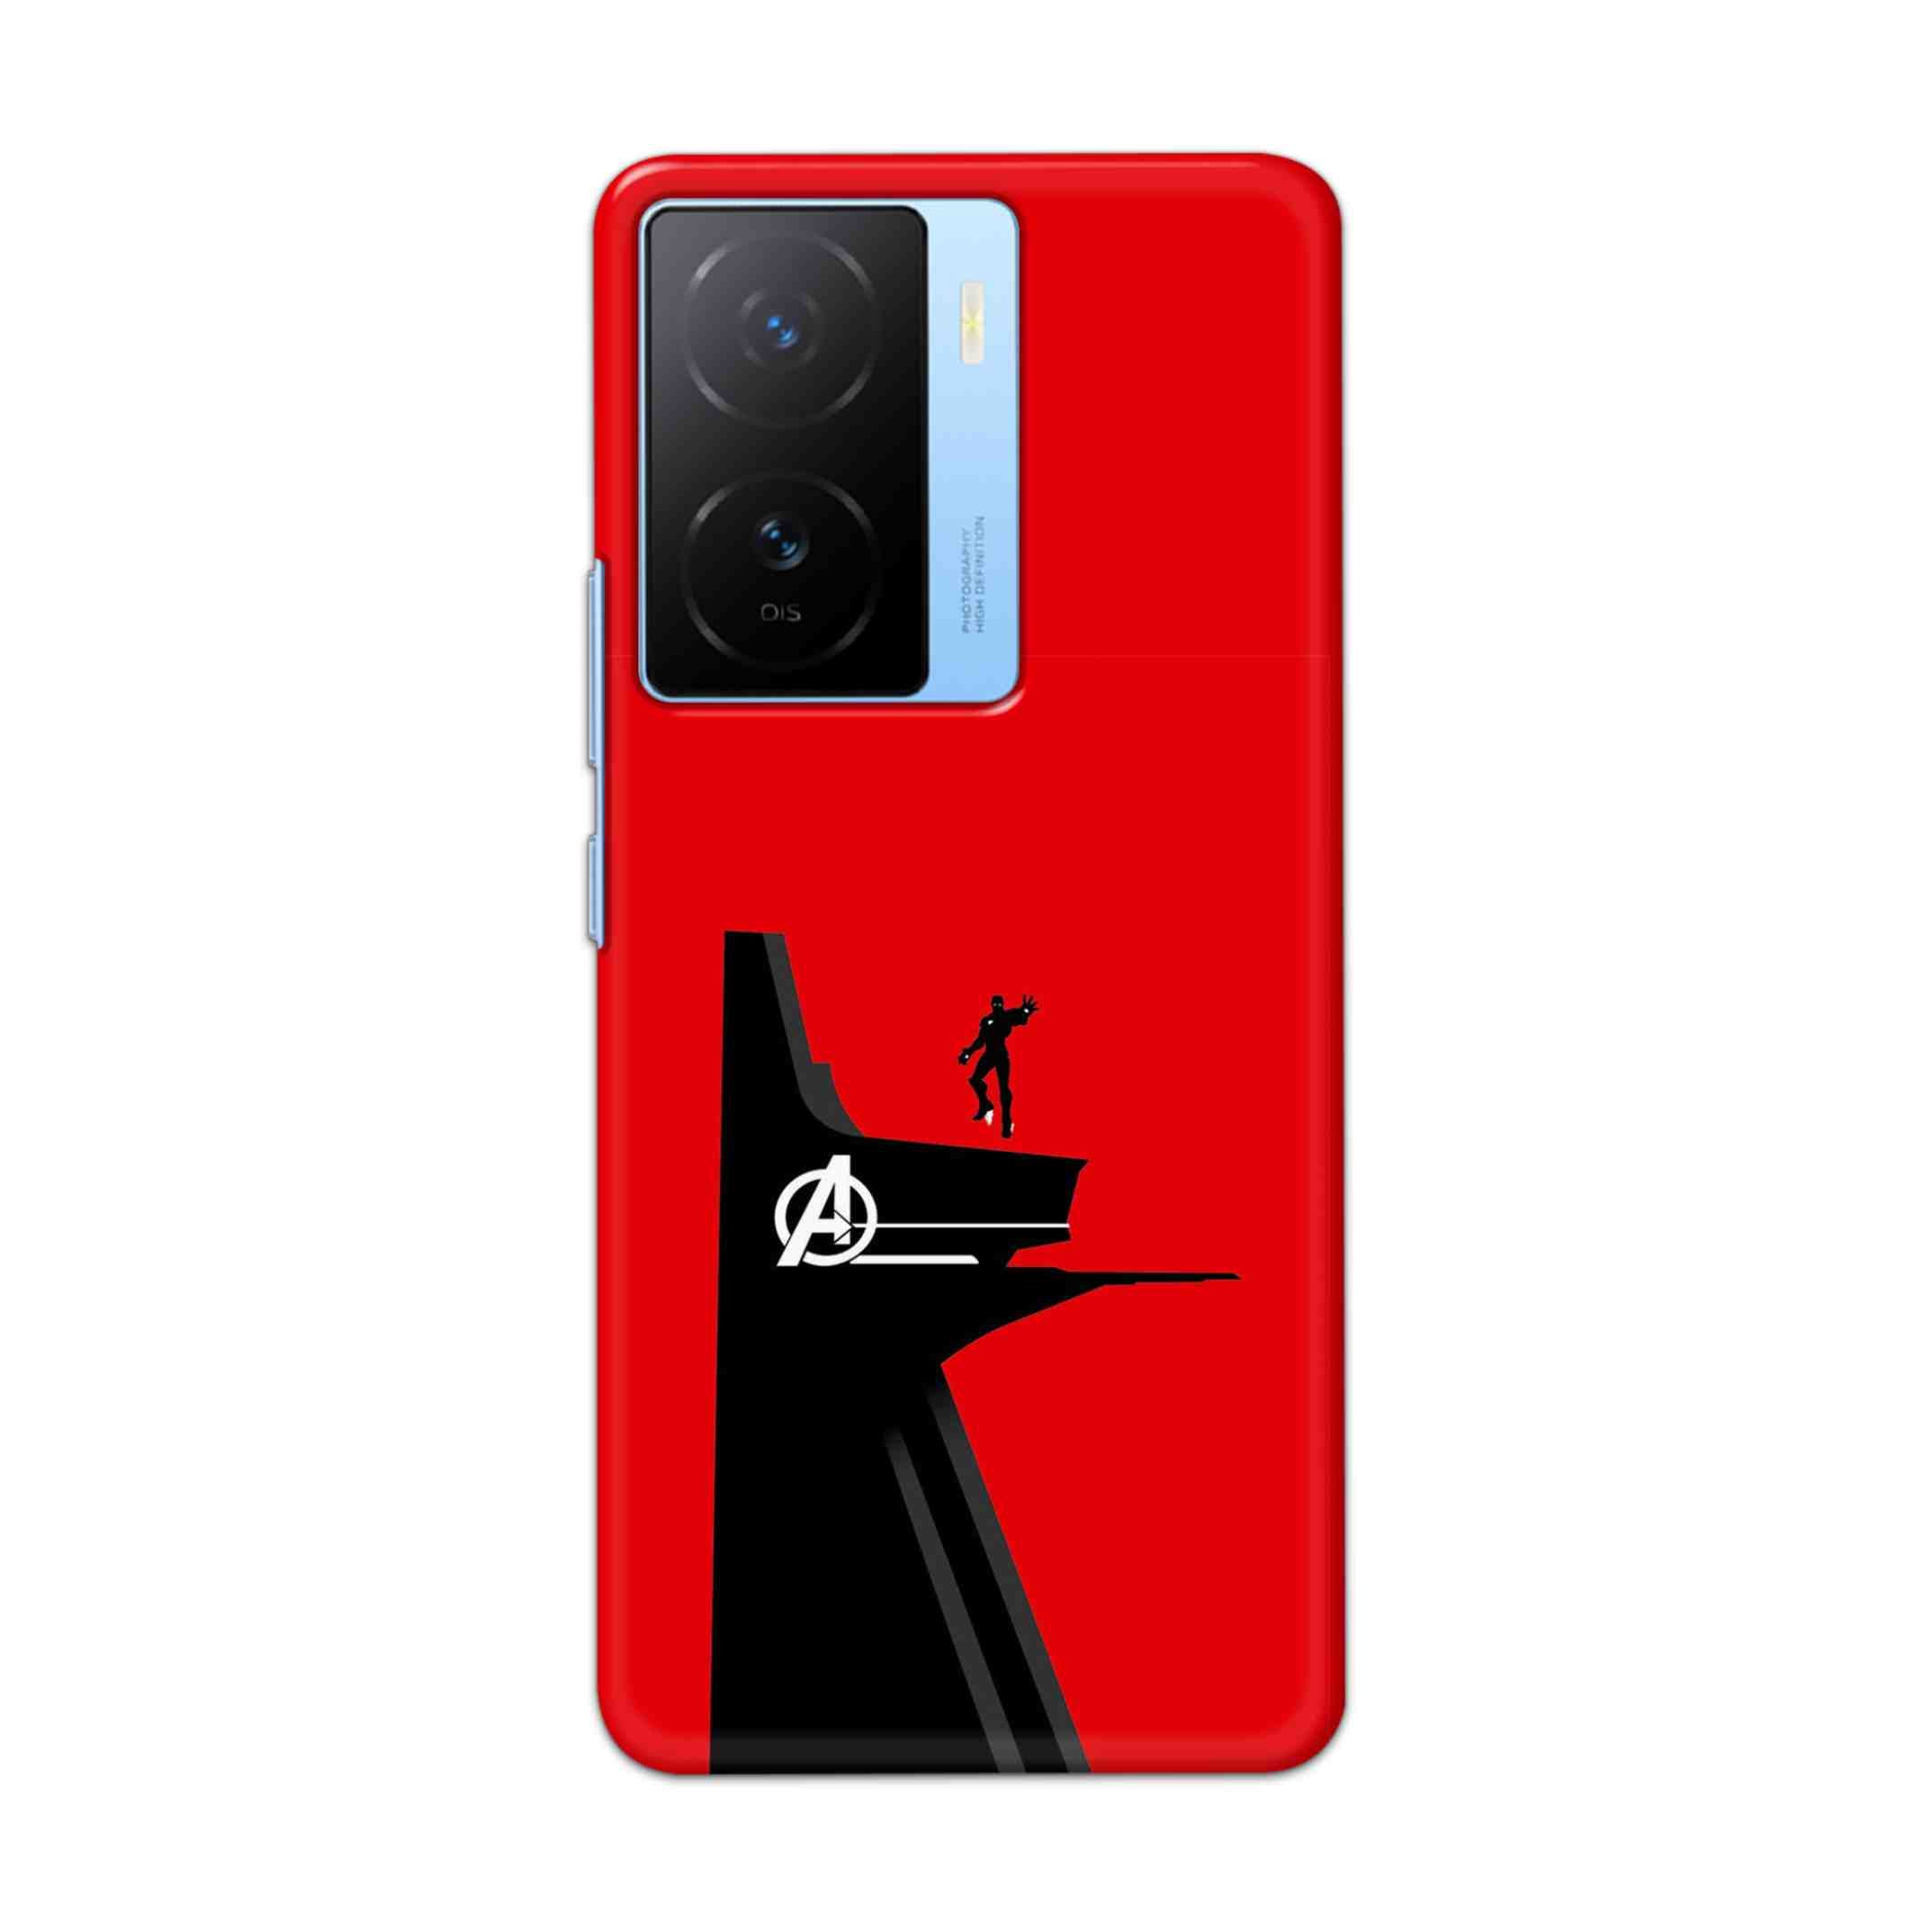 Buy Iron Man Hard Back Mobile Phone Case/Cover For iQOO Z7s Online